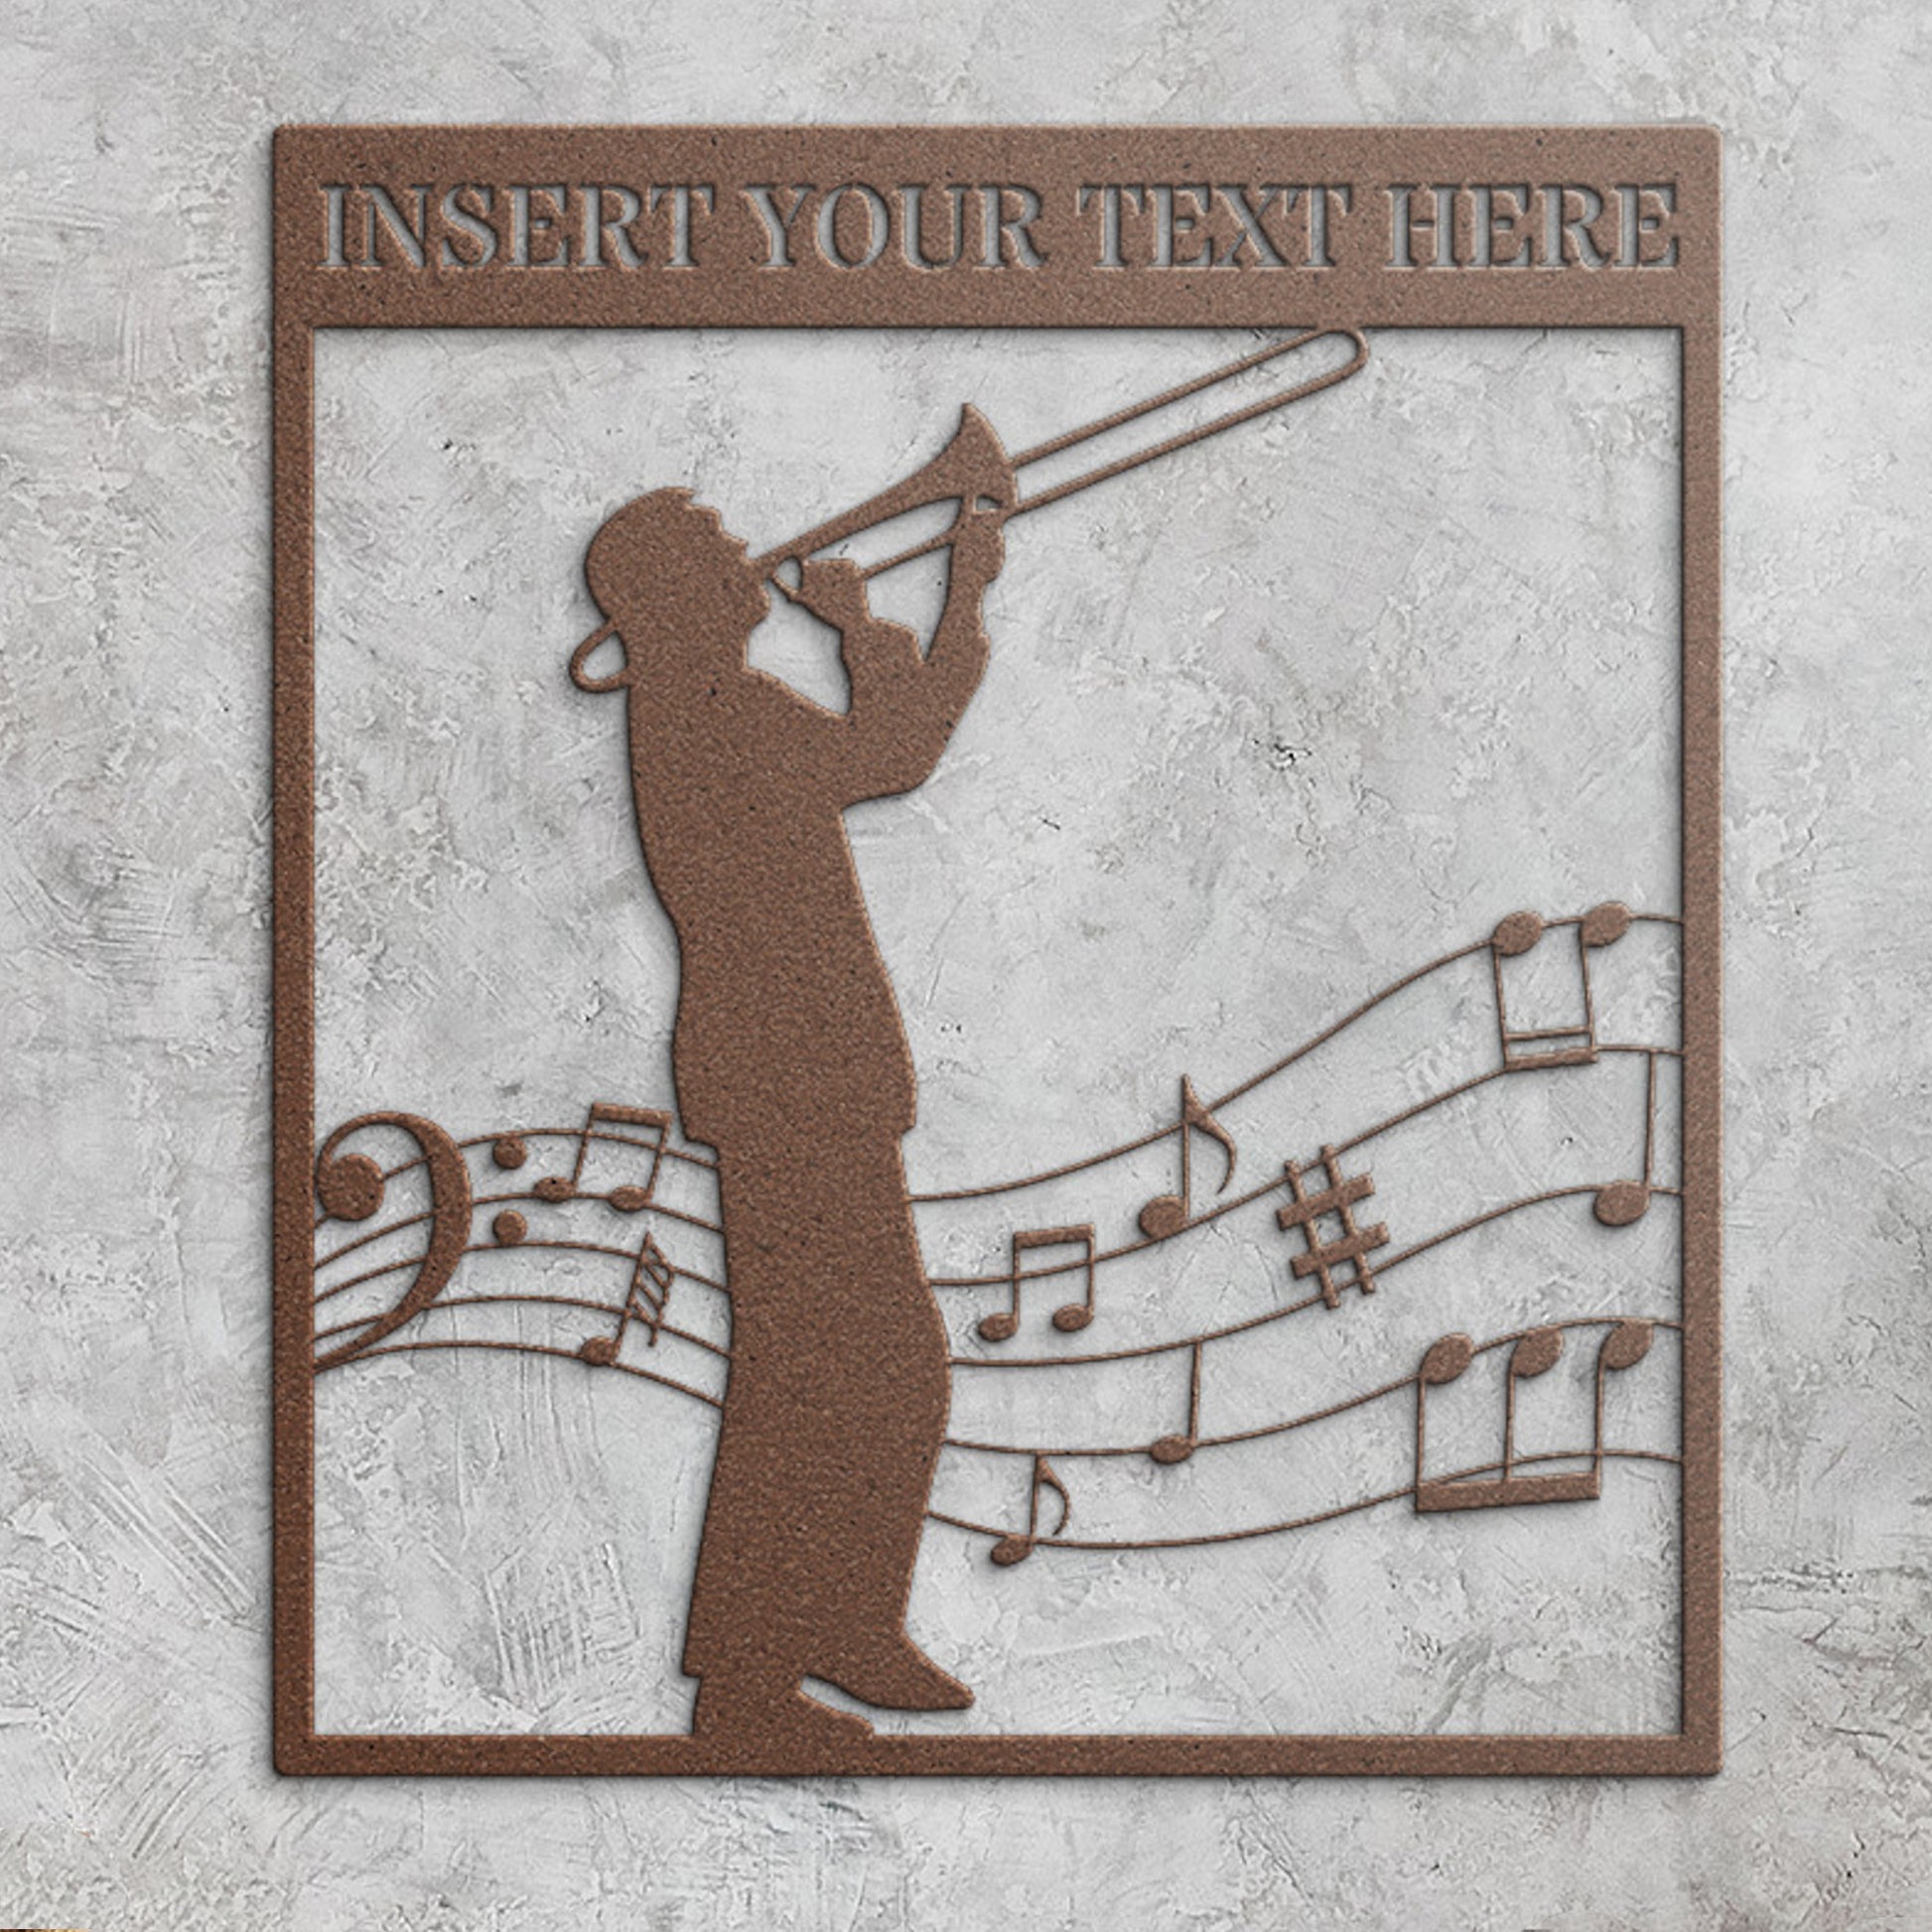 Personalized Trombonist Name Metal Sign, Custom Trombone Player Wall Decor.  Music Room Decoration. Musician Wall Hanging. Jazz Lover Gift